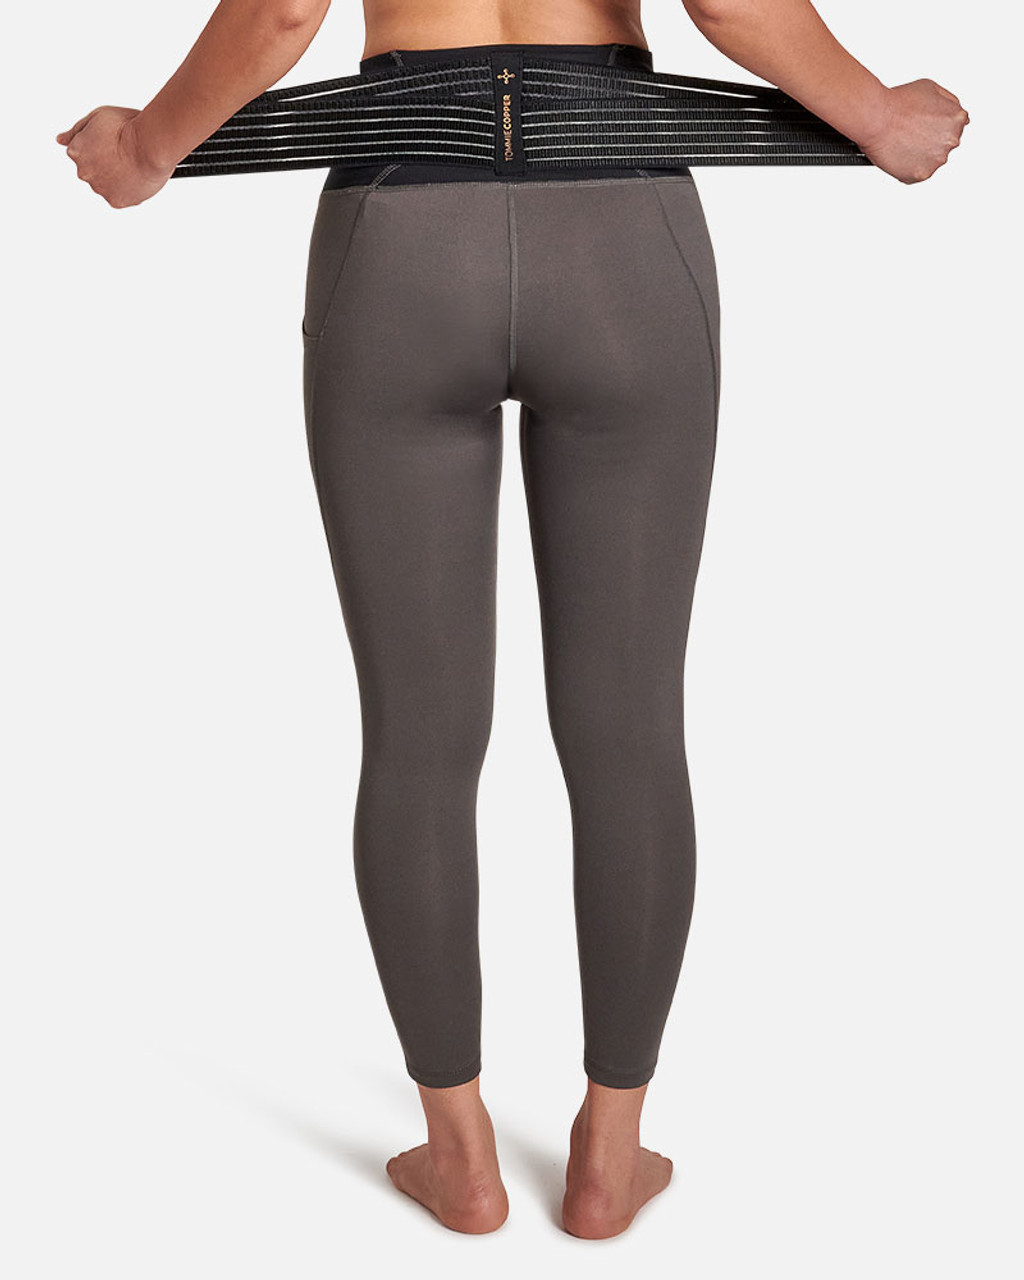 Women's Pro-Grade Lower Back Support Leggings with Adjustable